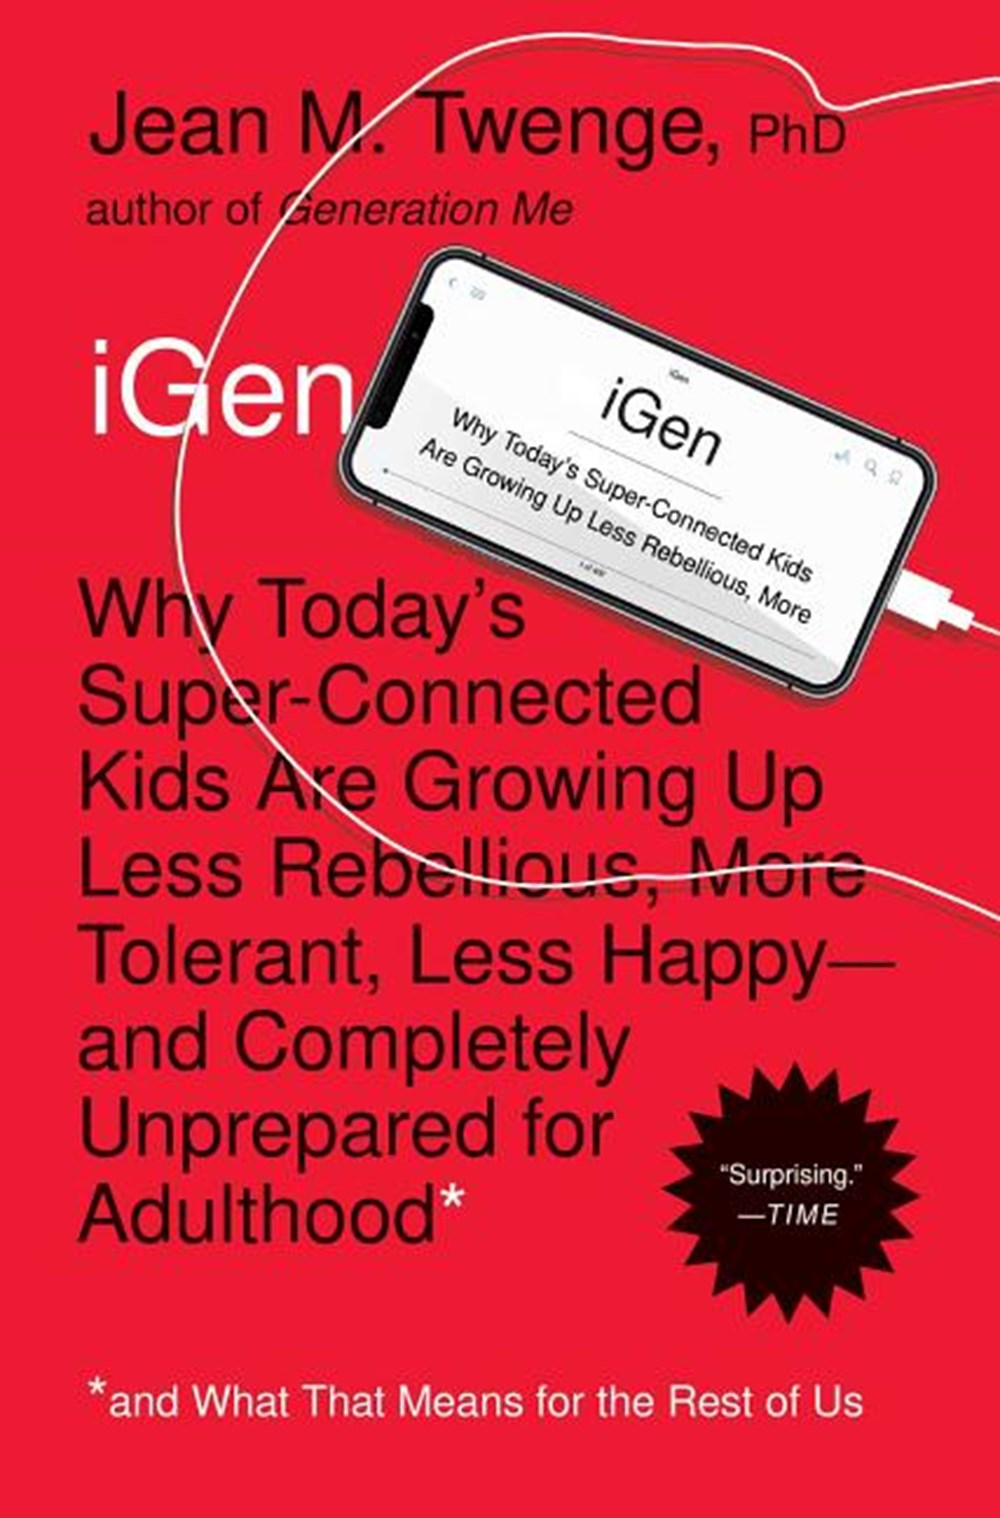 iGen Why Today's Super-Connected Kids Are Growing Up Less Rebellious, More Tolerant, Less Happy--And